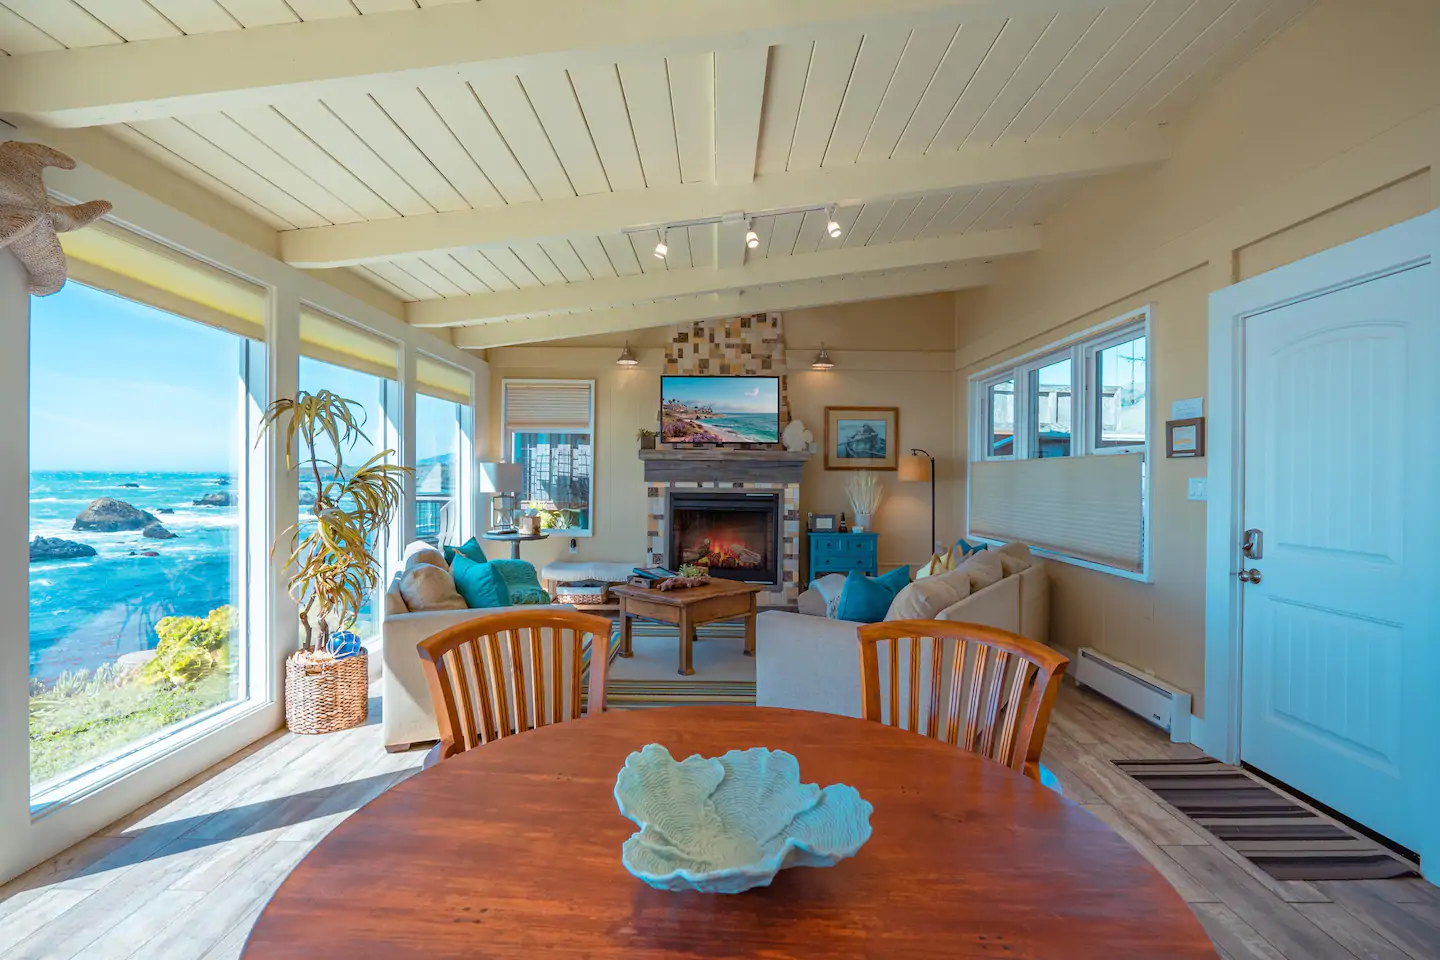 Airy, light, cozy beach house living area, with table, chairs, sofa seats, a fire place, and ocean view.  Airbnb in California.